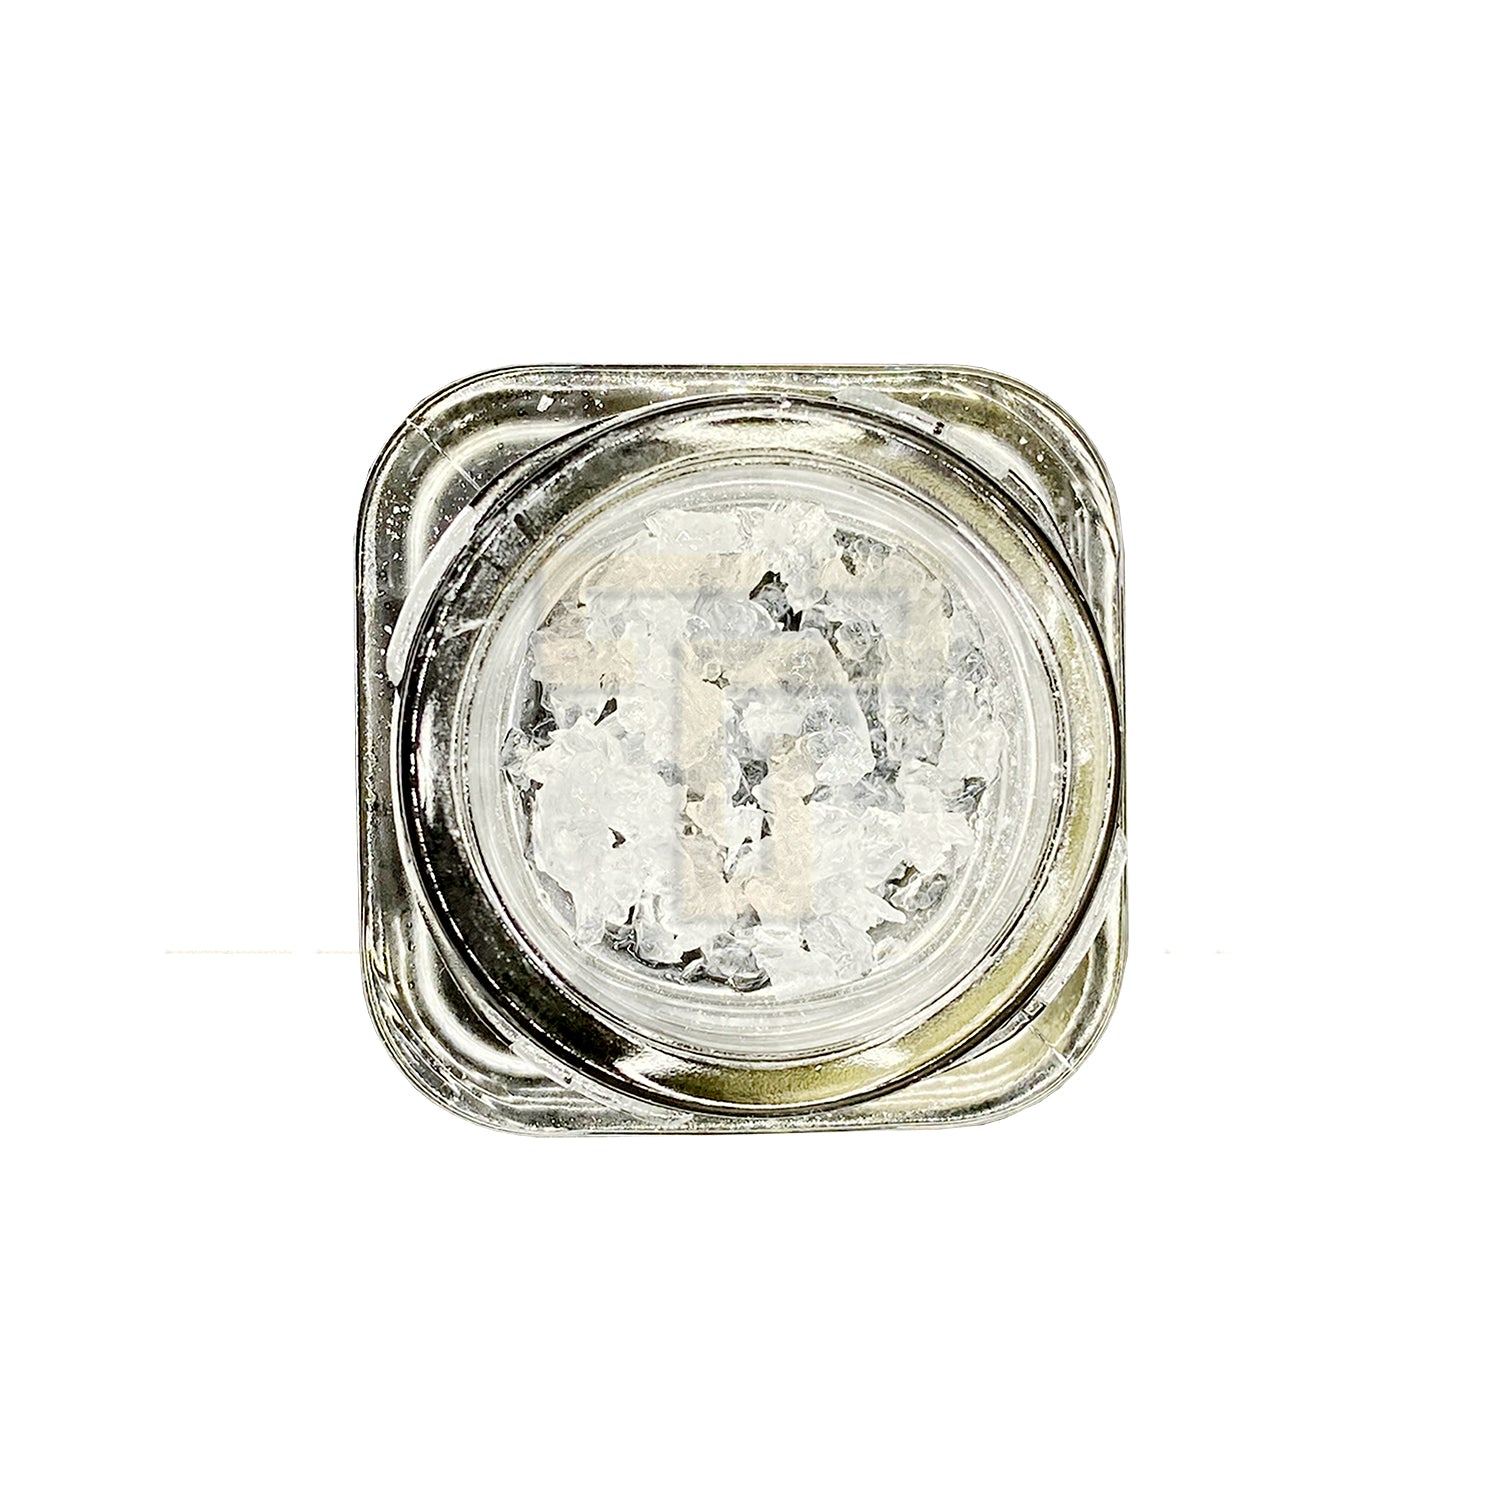 A photo showing sauce diamonds in a jar on a white background.